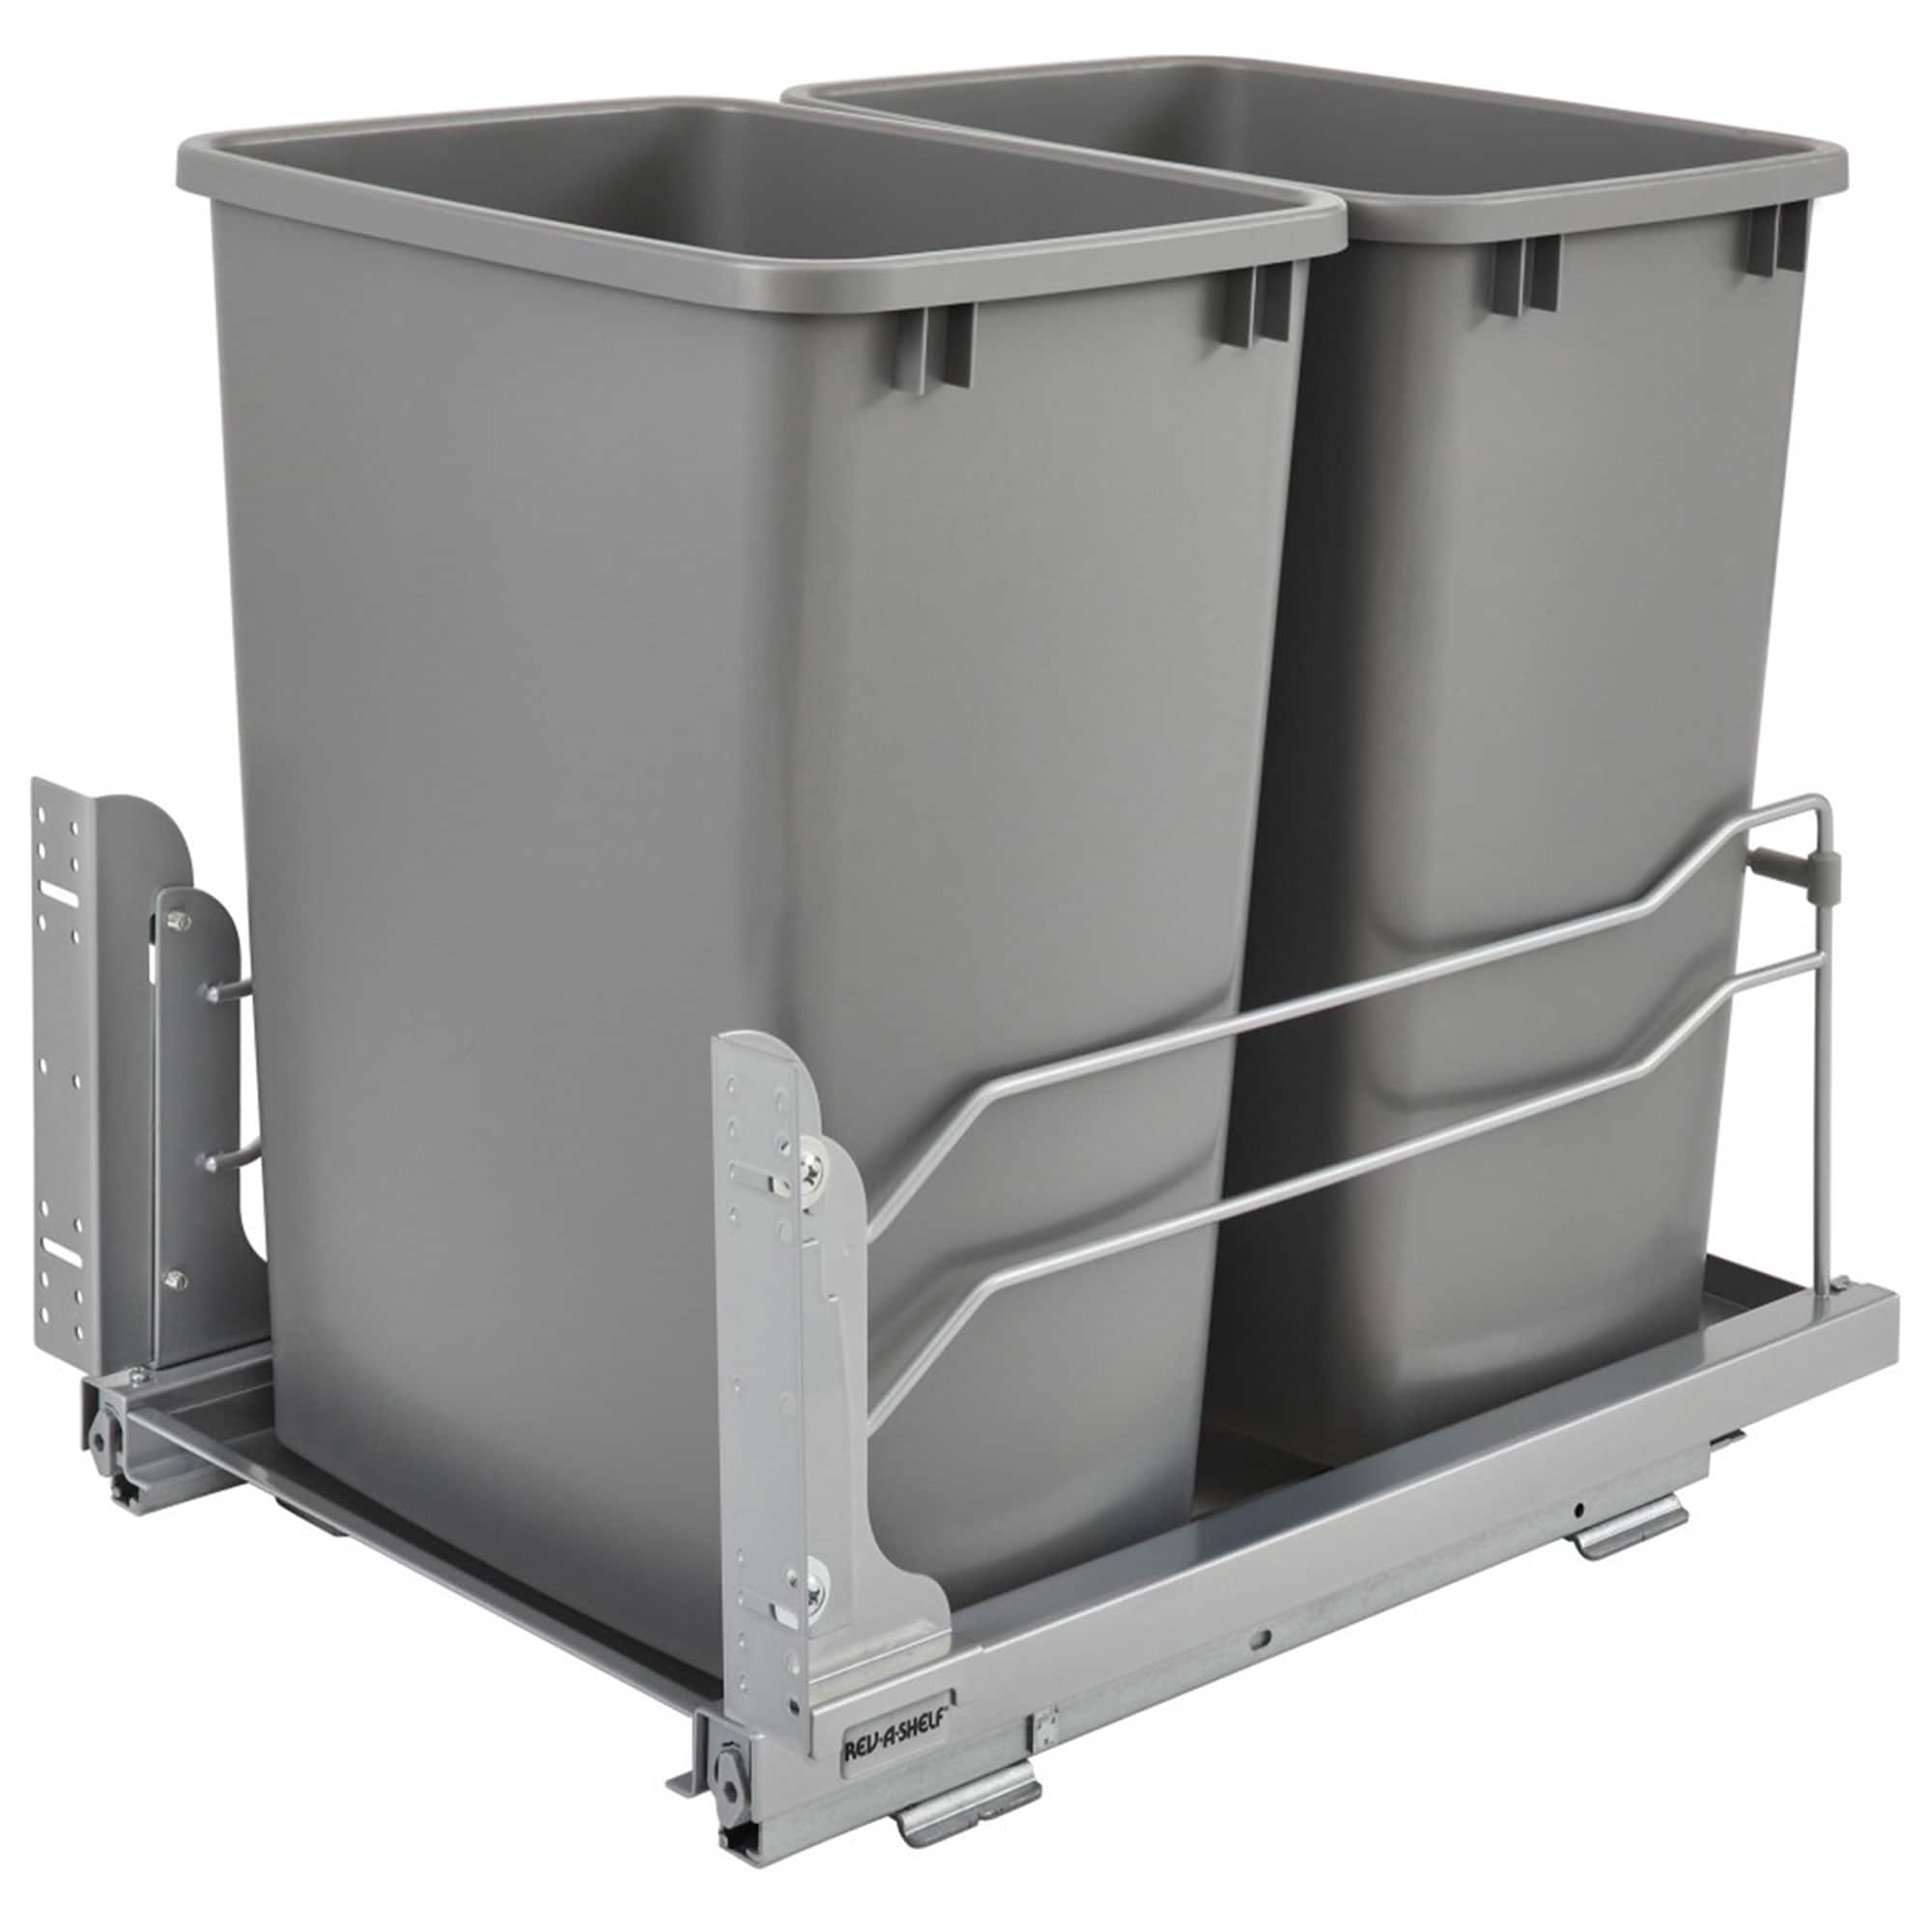 Hanging Trash Can With Lid For Kitchen Cabinet Door Or Under Sink,kitchen  Compost Bin Countertop,mountable Trash Can,grey